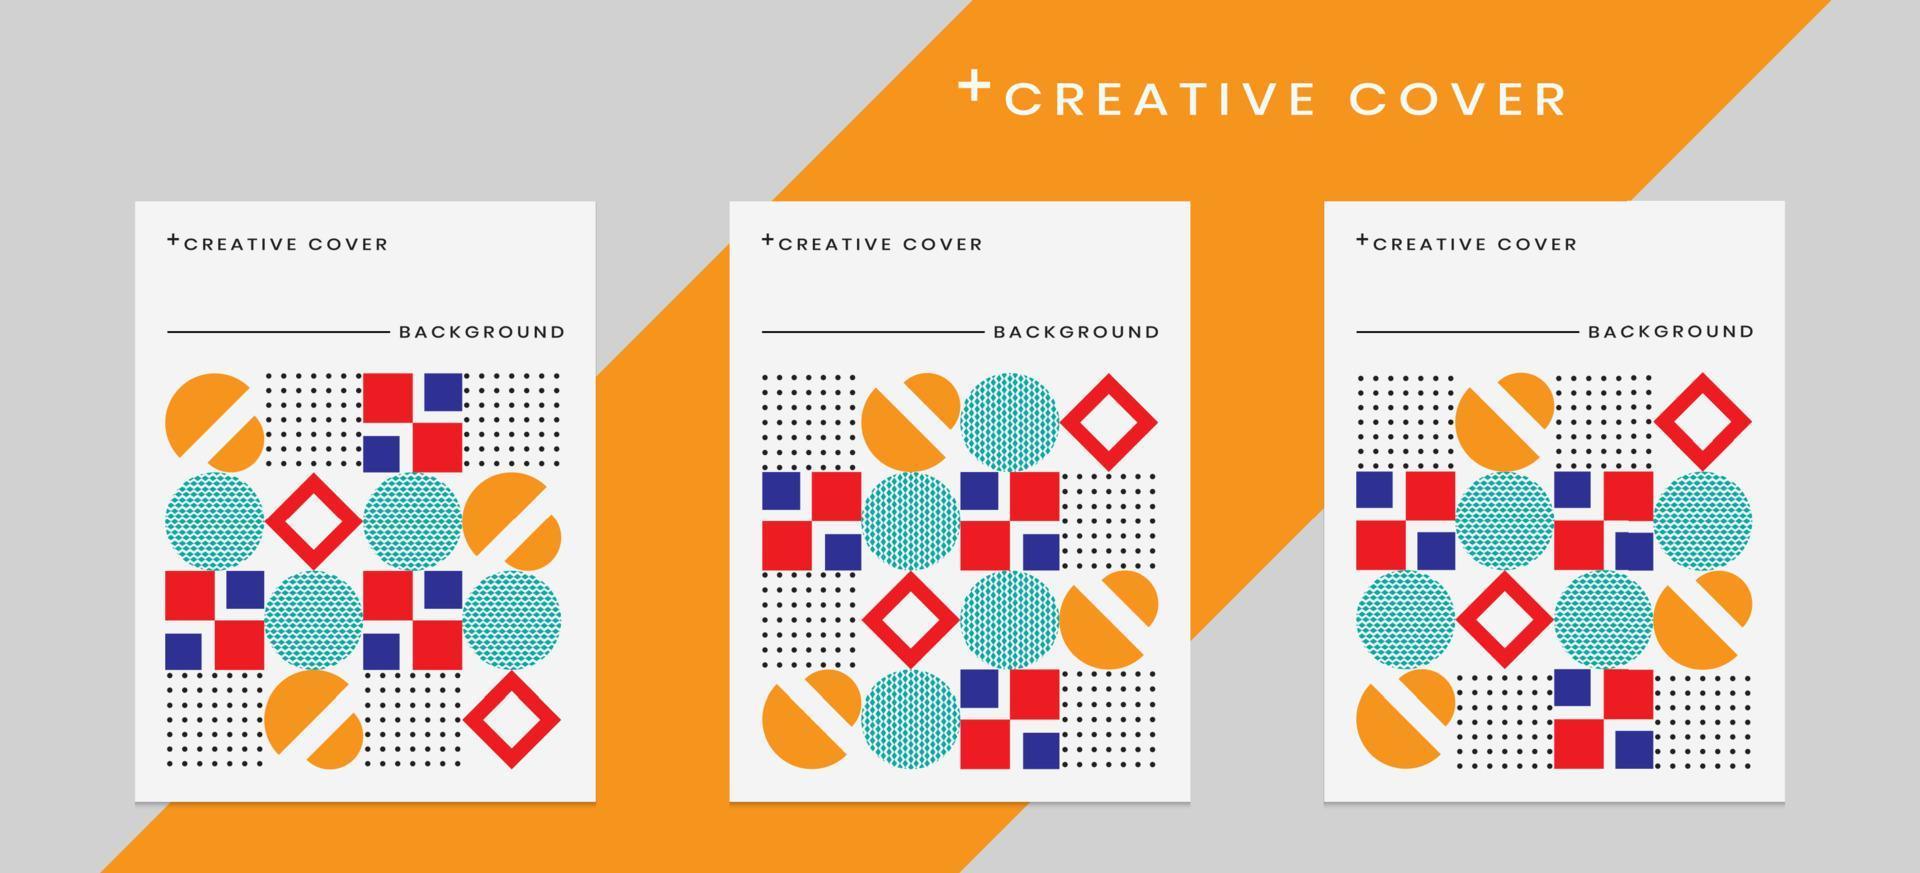 Creative cover design in geometric style. minimal. can be used for backgrounds, layouts, bauhaus art, frames, banners, posters, leaflets, web templates. vector